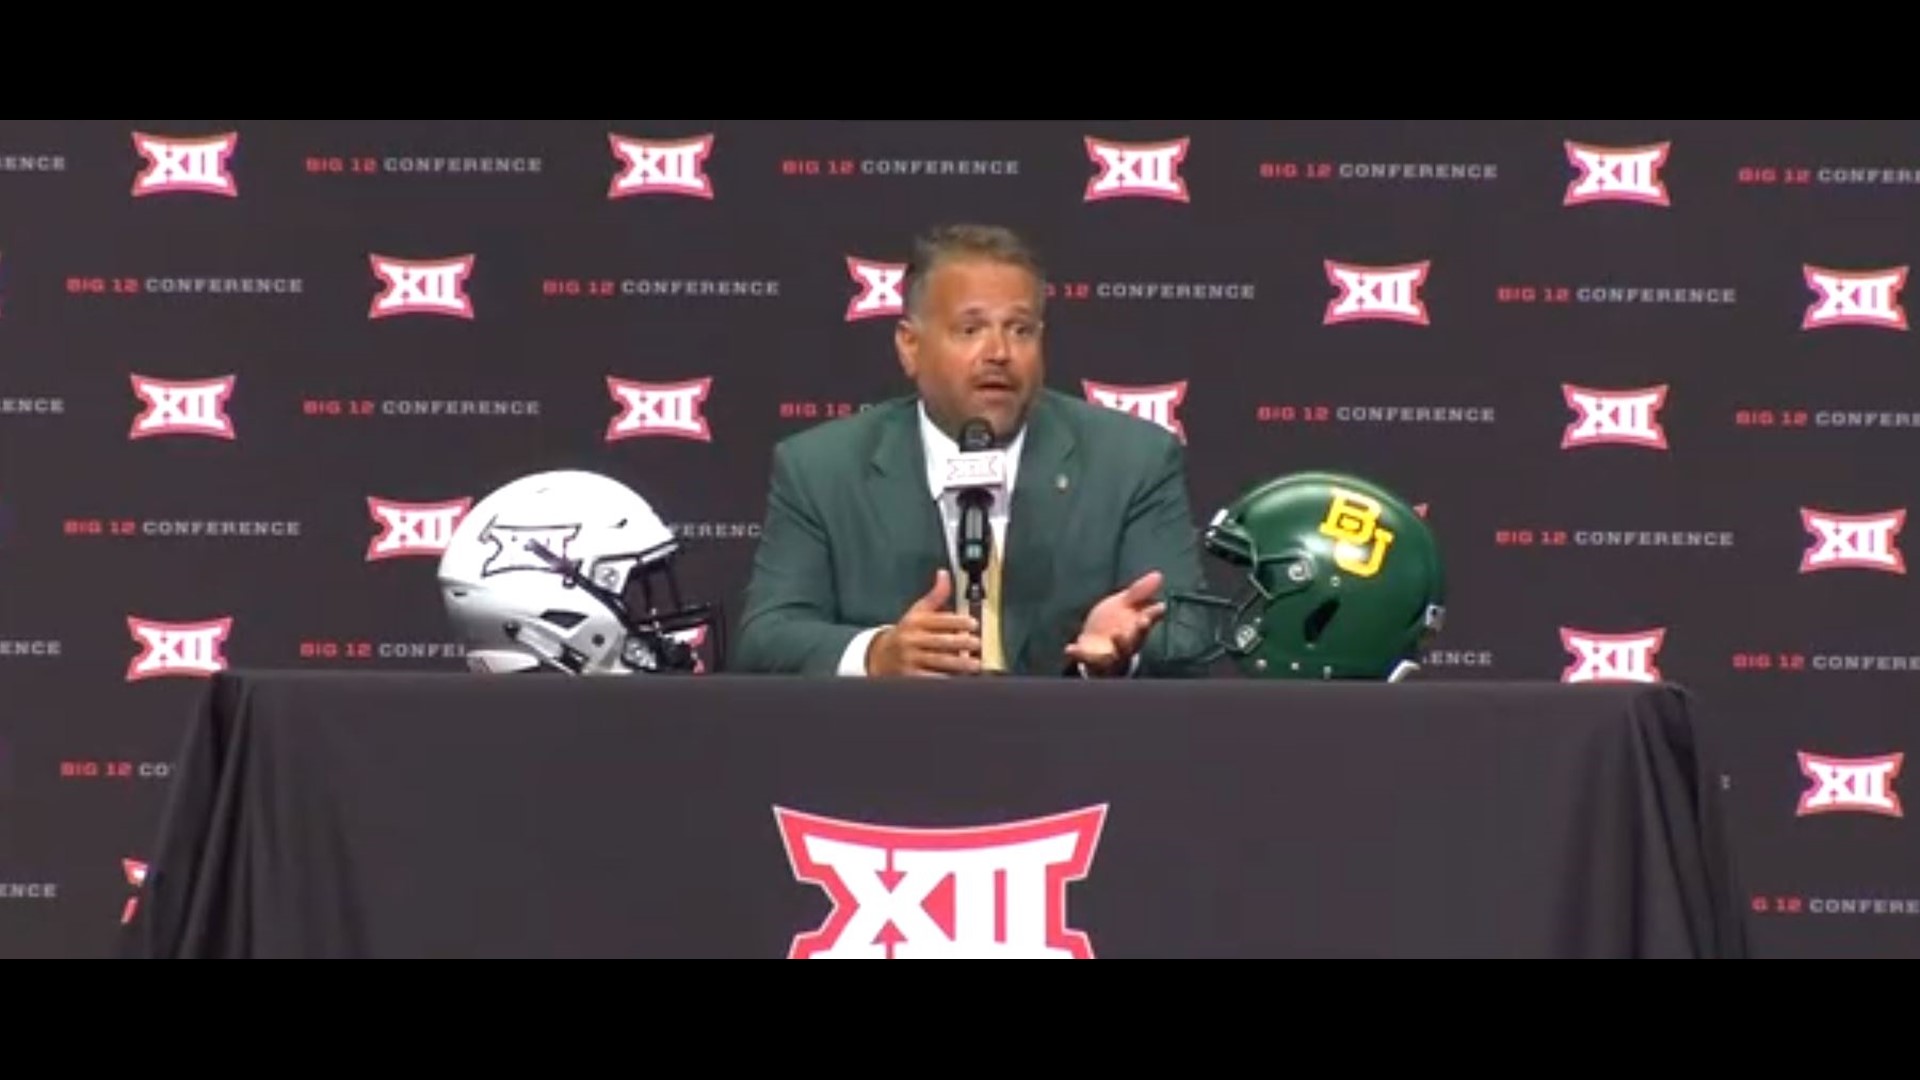 Head Coach Matt Rhule looks to improve on his team's 7-6 record as he starts his third year leading the Bears.